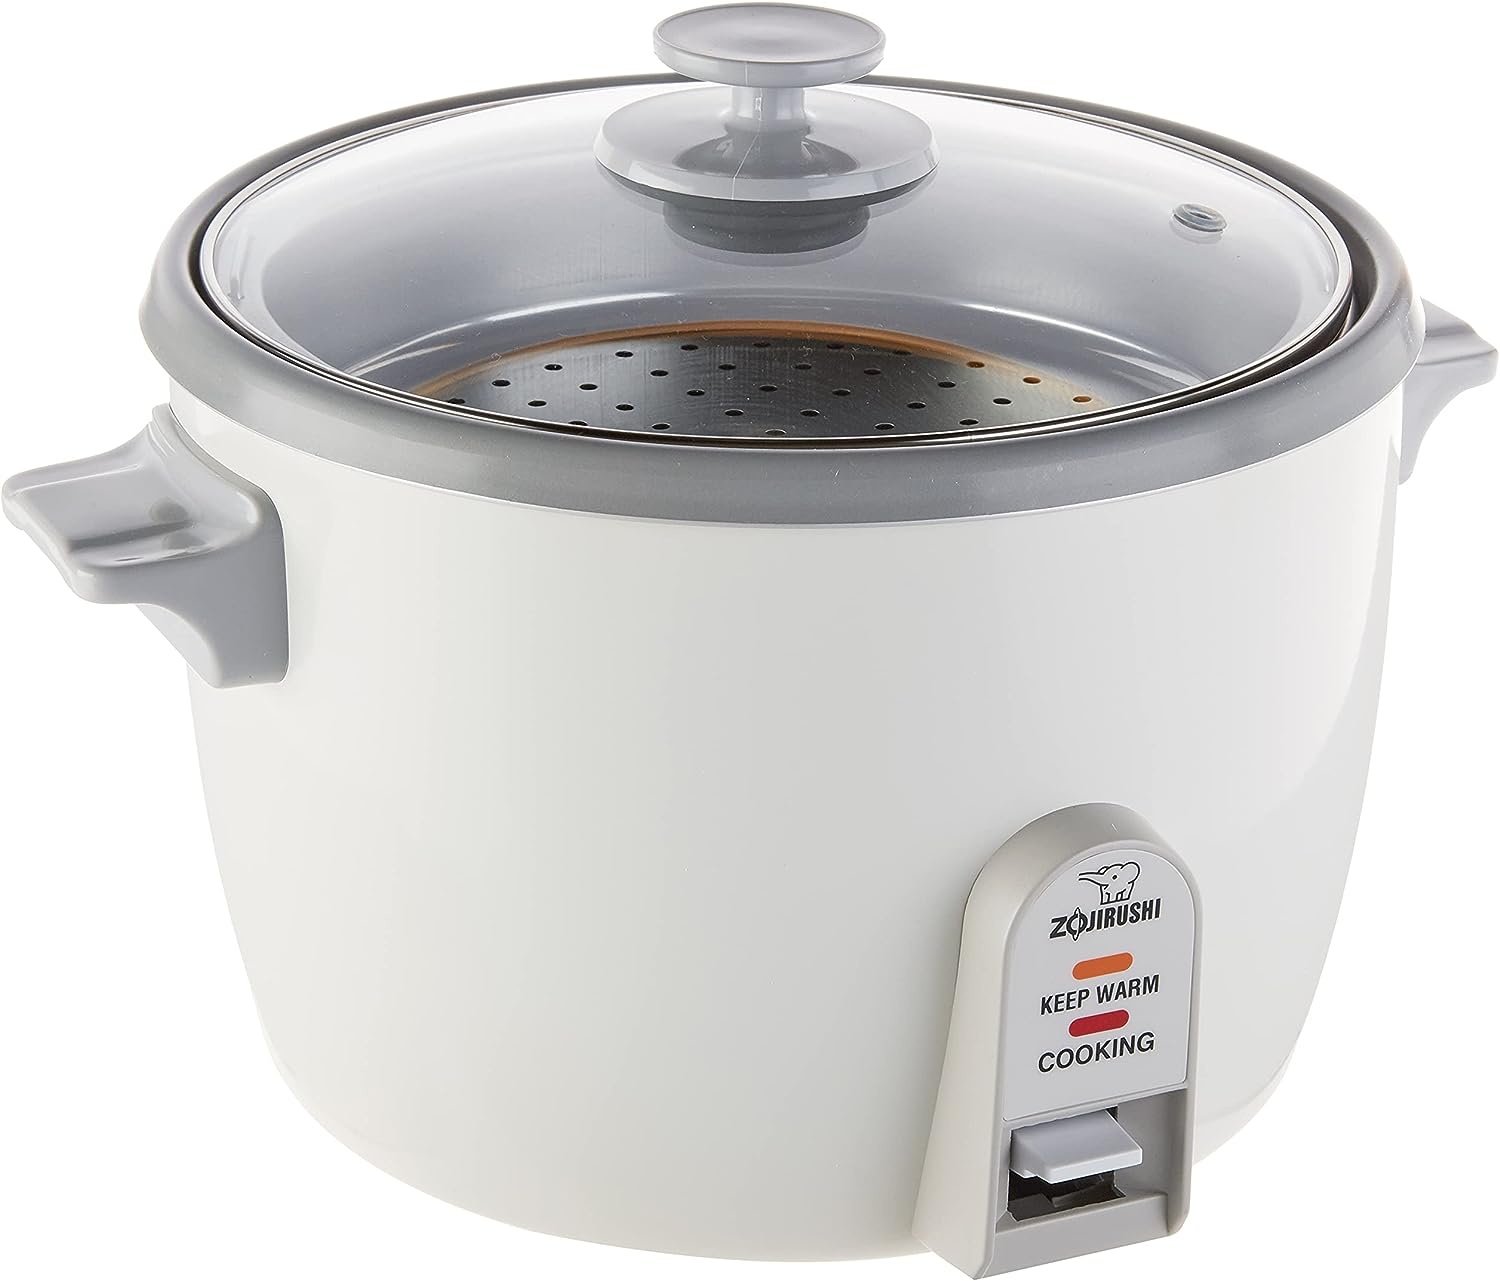 RICE COOKER 10 CUP, White – Lovetocook